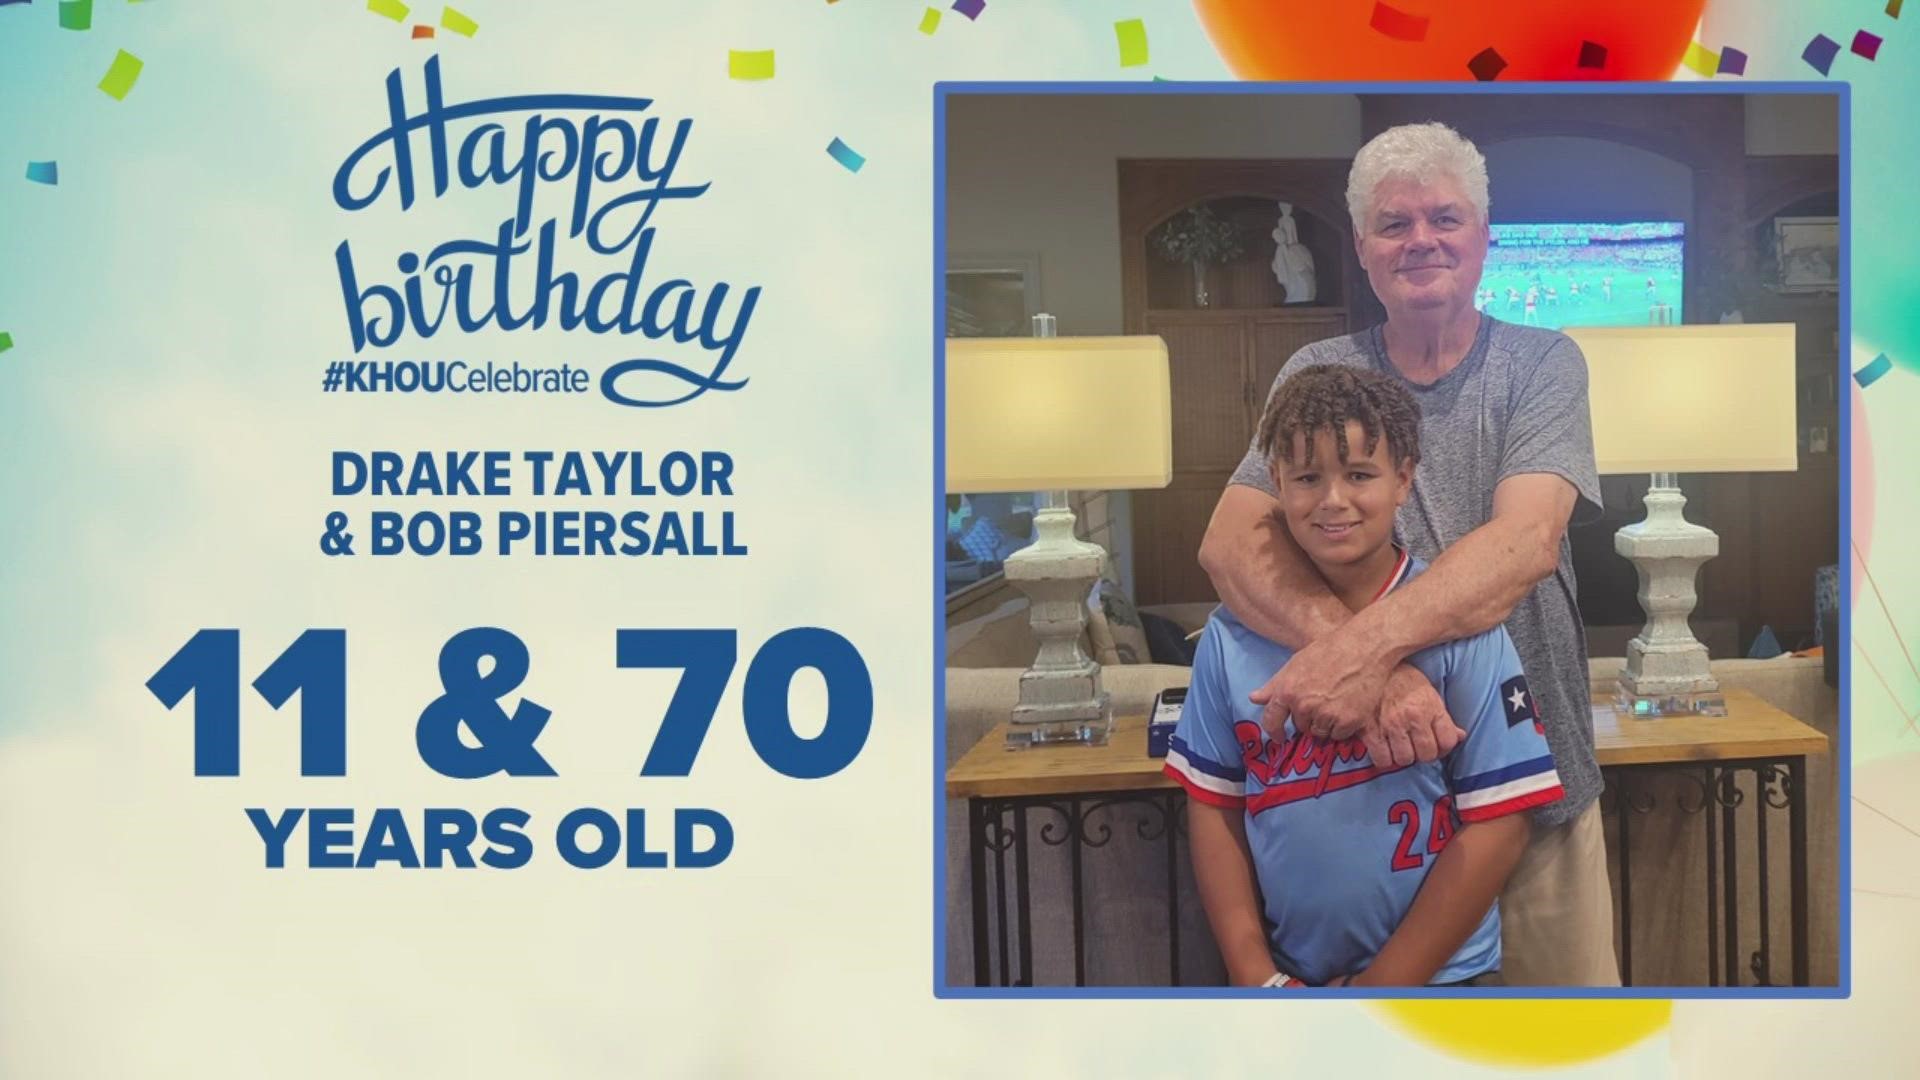 Celebrating you! Happy birthday to everyone born on 9-12, including this  Houston dad and his son 